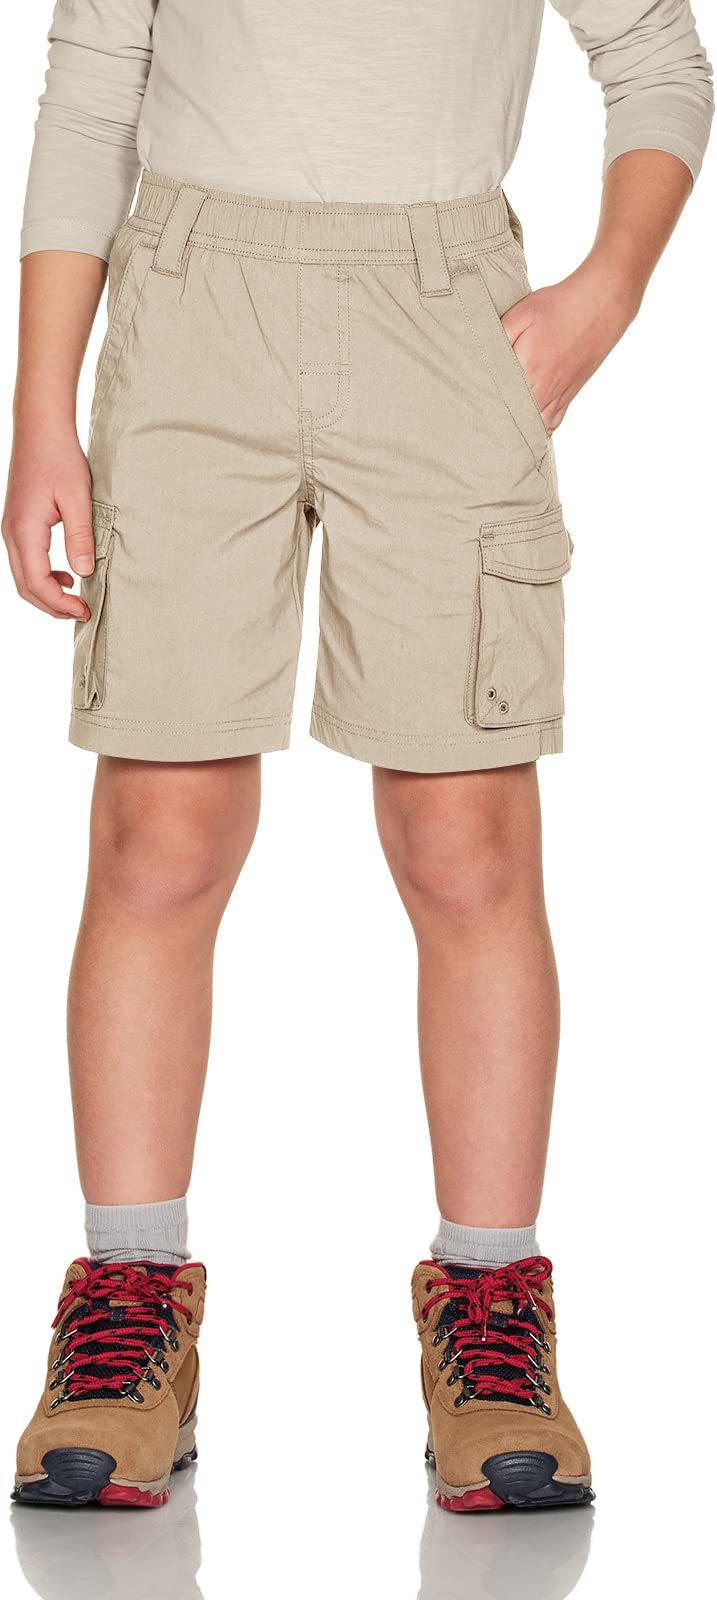 CQR Kids Youth Pull on Cargo Shorts, Outdoor Camping Hiking Shorts,  Lightweight Elastic Waist Athletic Short